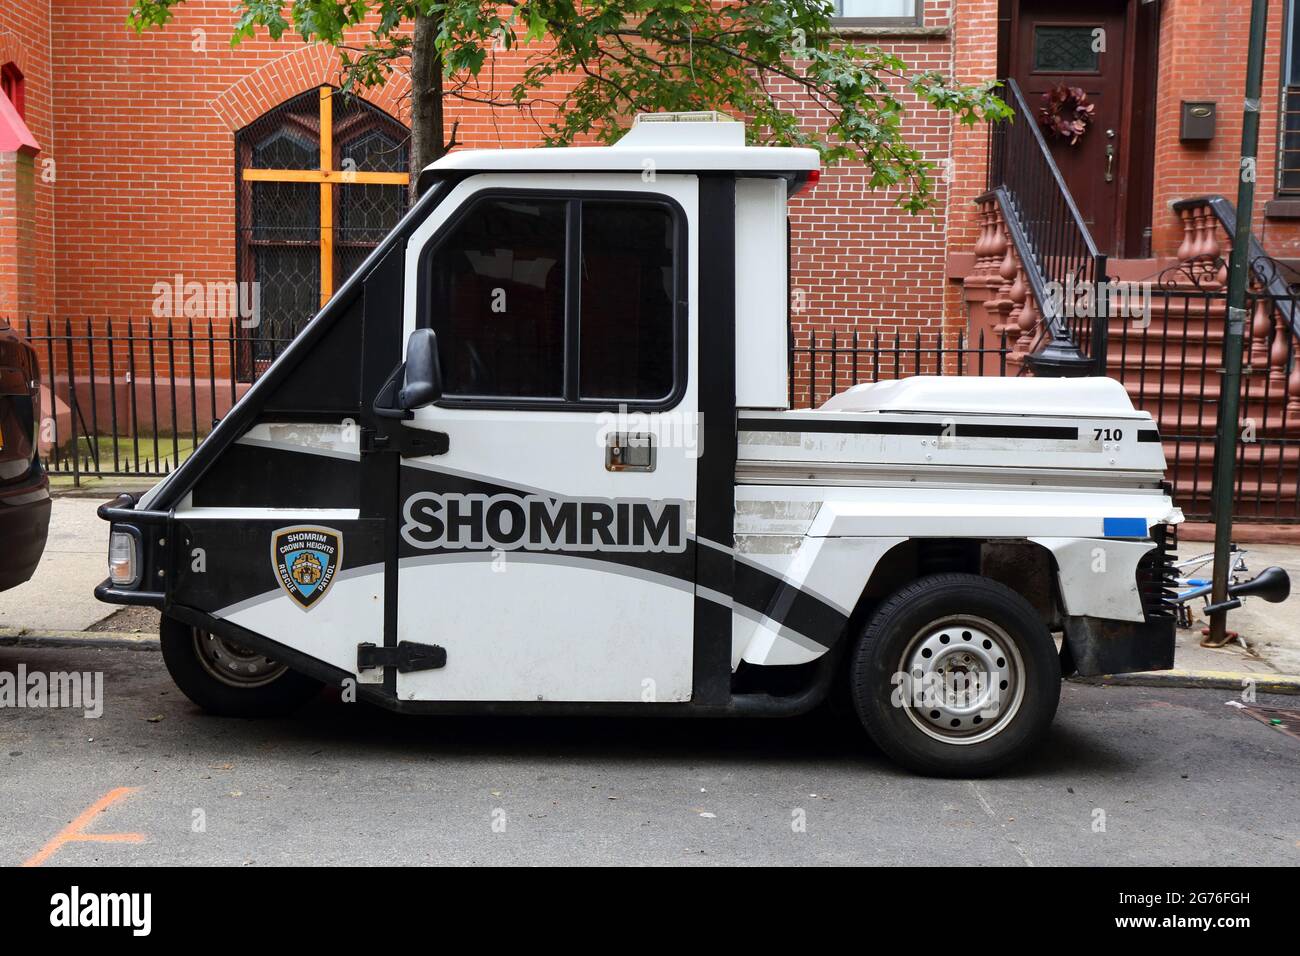 A Crown Heights Shomrim 3-wheel scooter patrol vehicle parked on a street in Brooklyn. Stock Photo